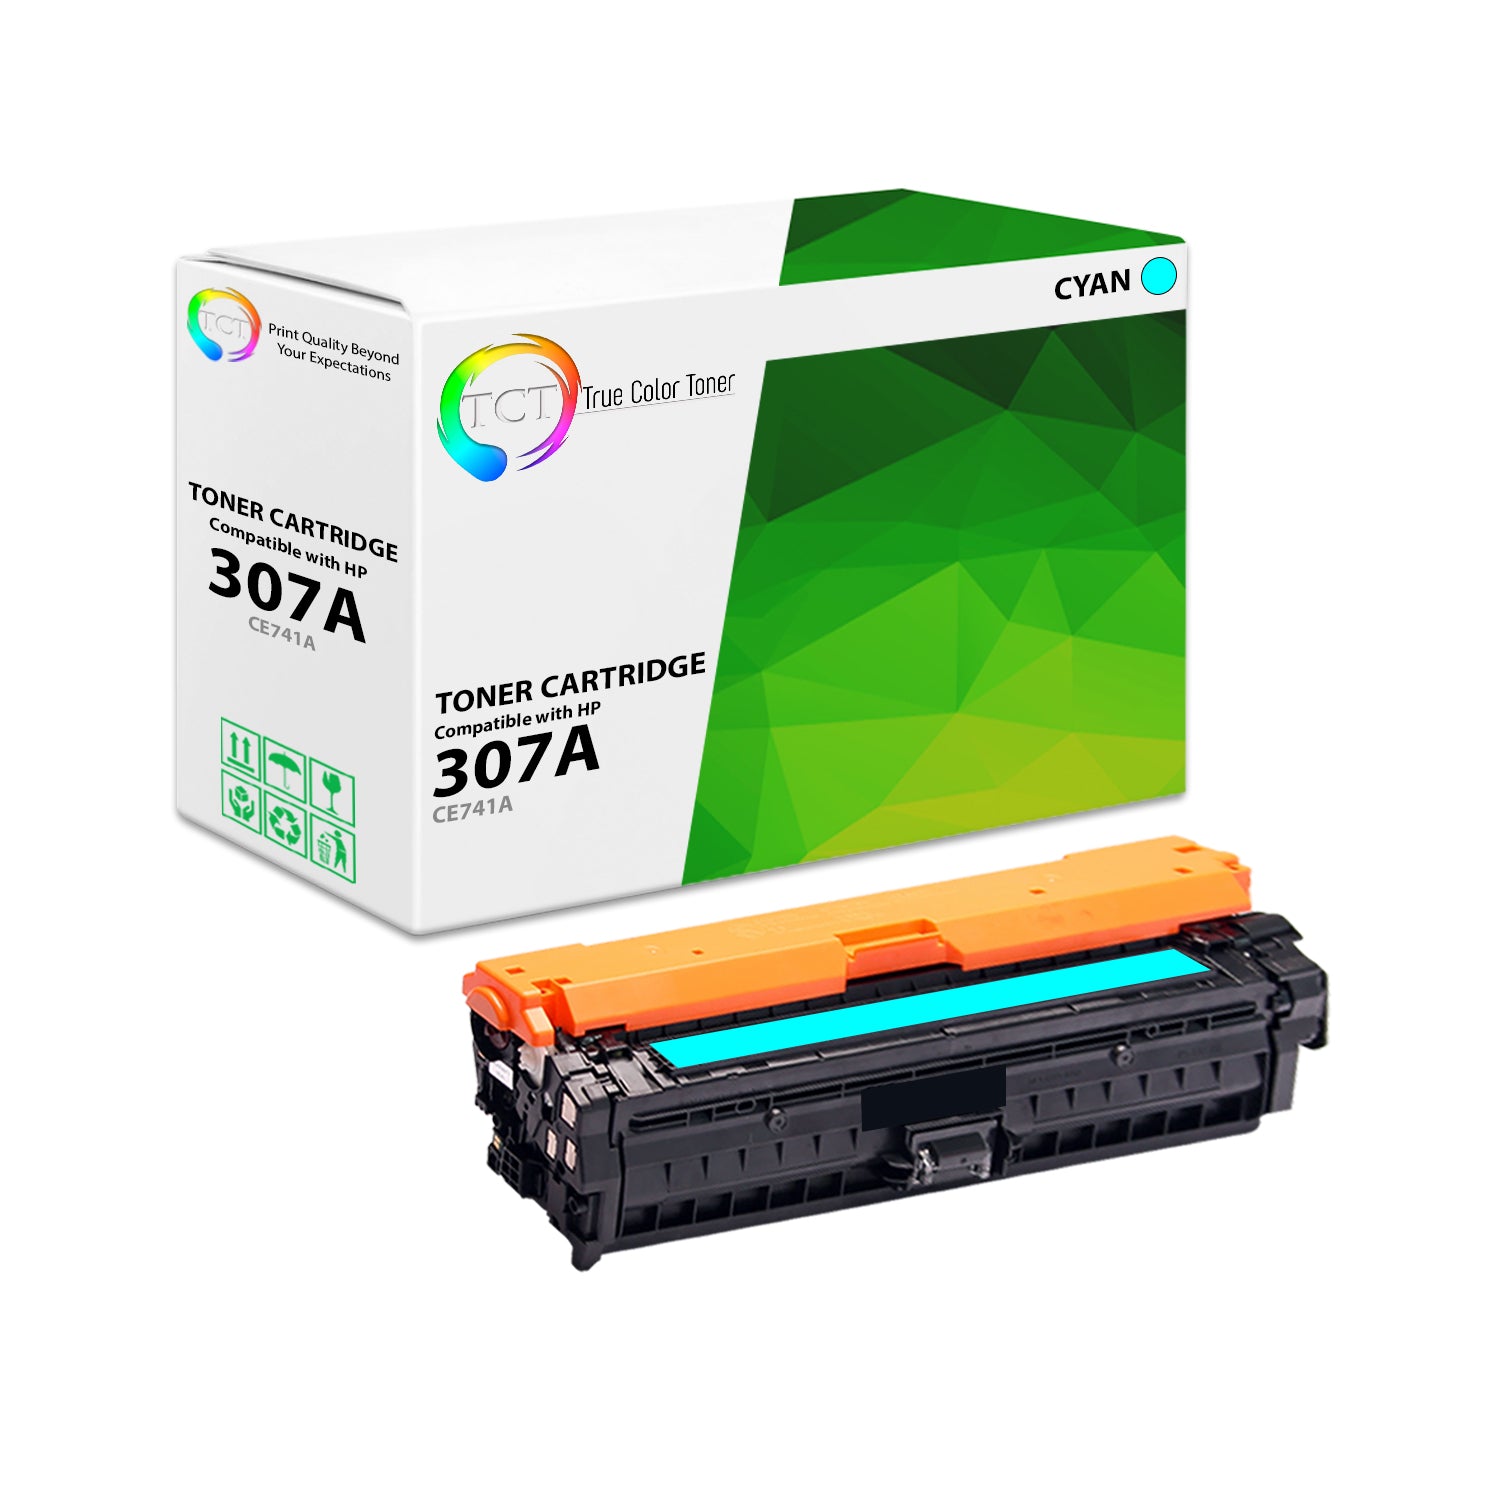 TCT Compatible Toner Cartridge Replacement for the HP 307A Series - 1 Pack Cyan